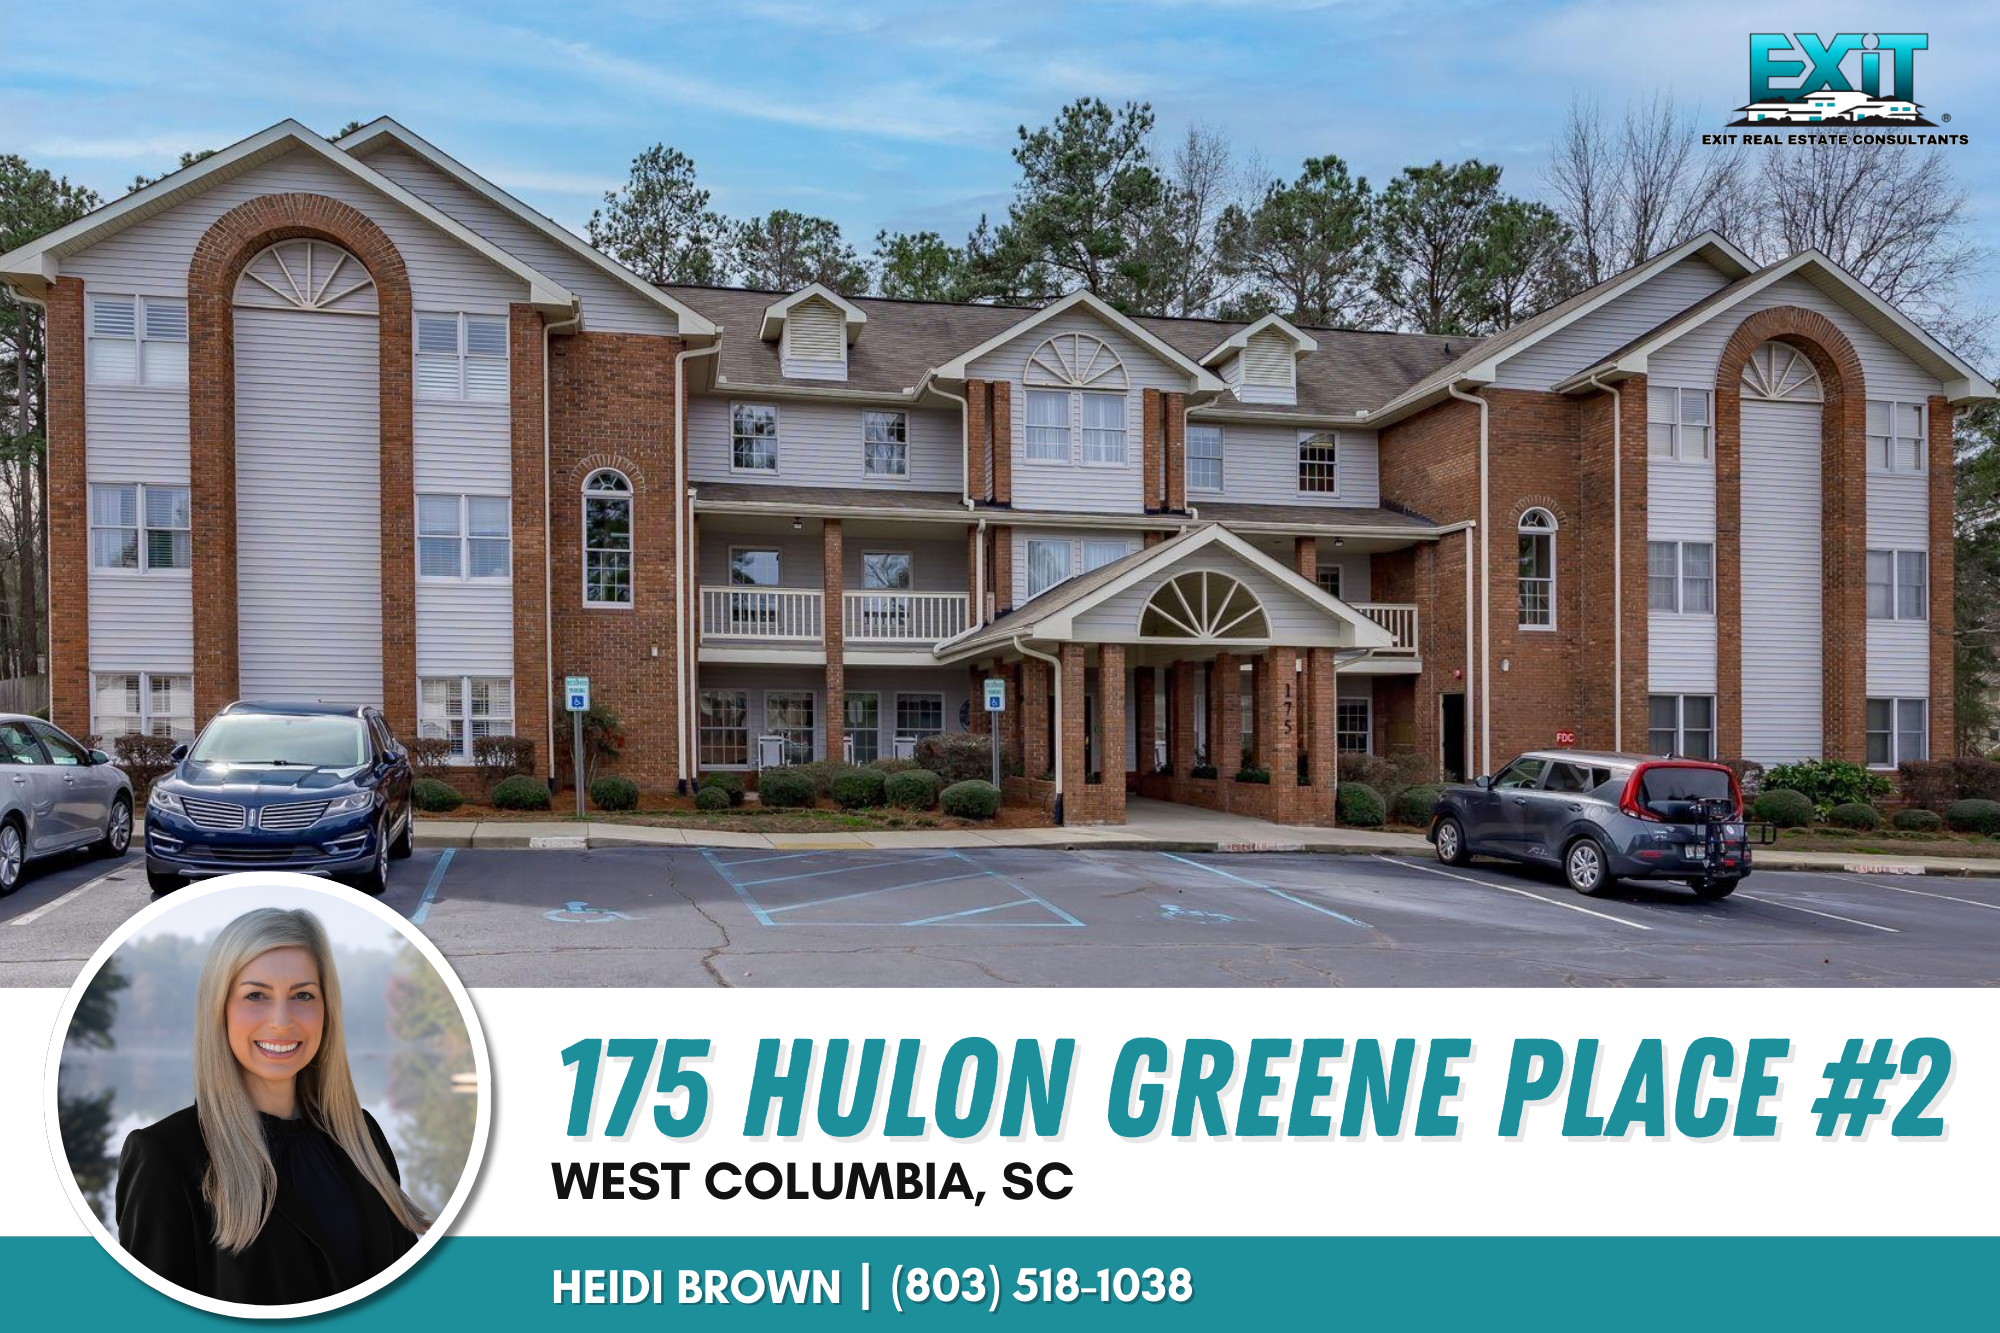 Just listed in Hulon Greene - West Columbia